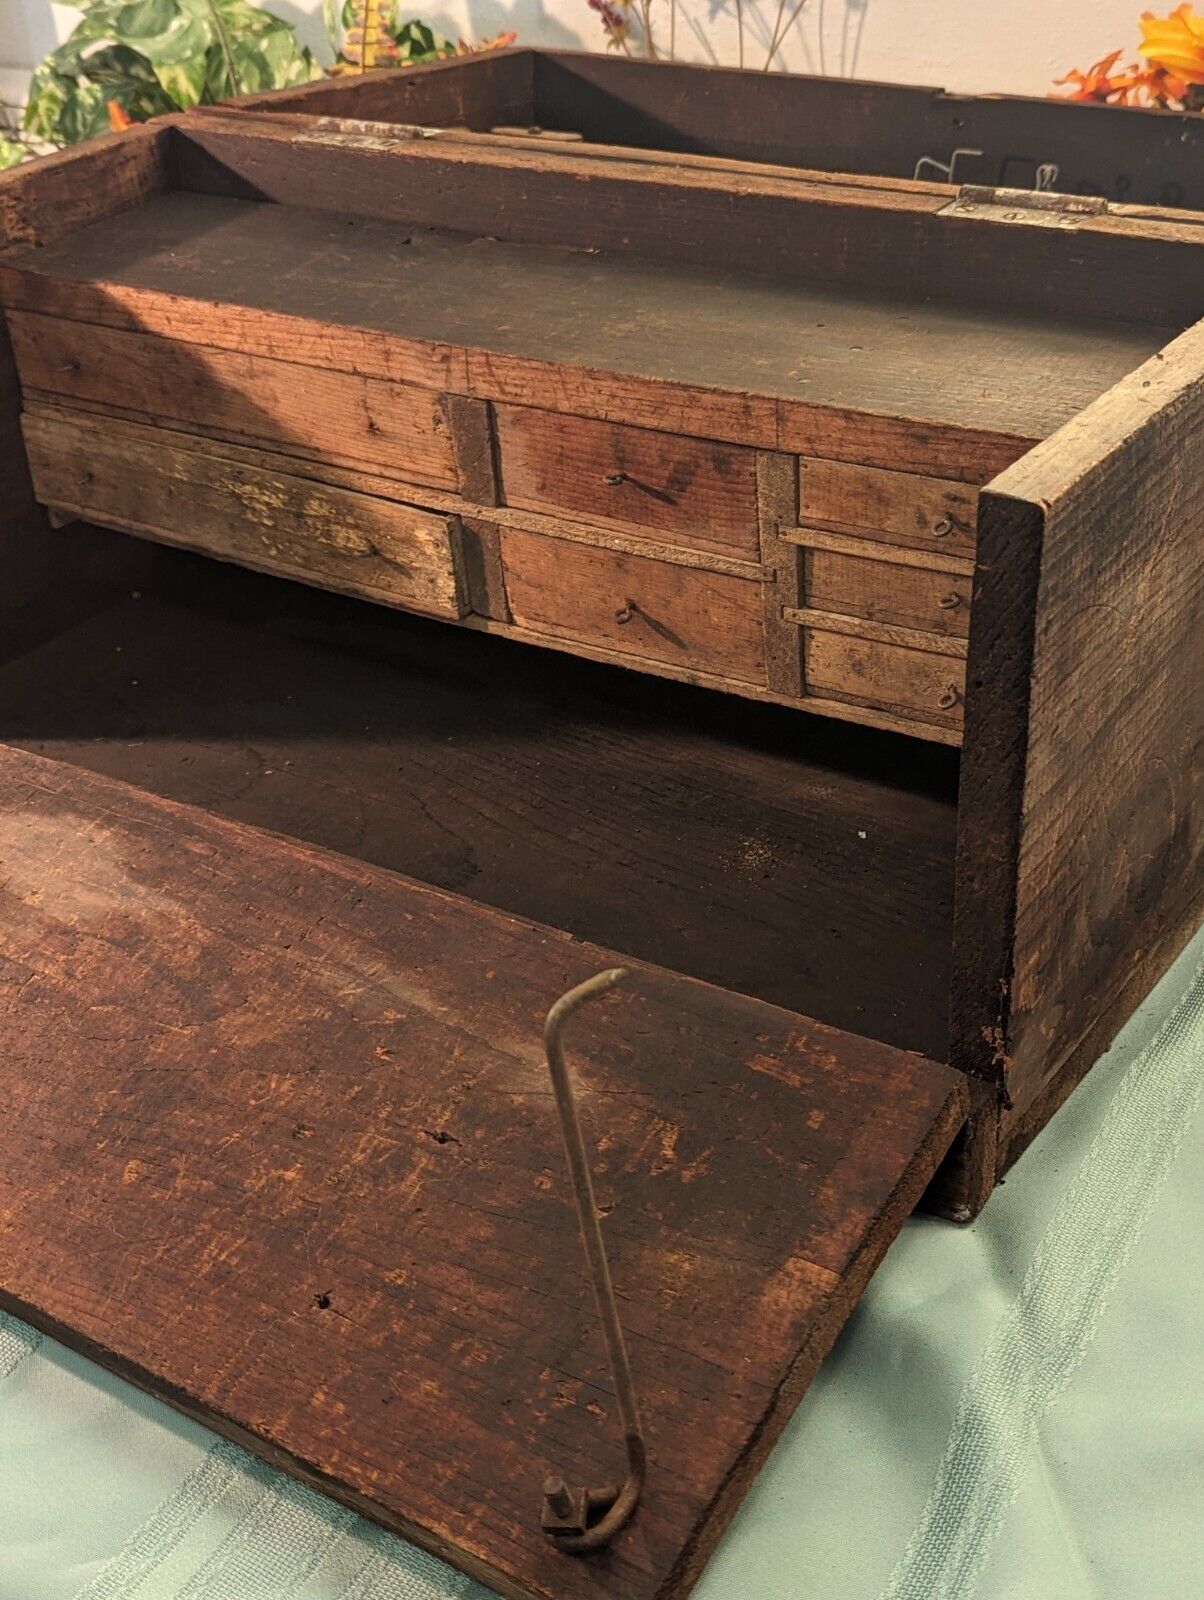 Antique Tool Box Chest Machinists Old Vintage Wood 6 Draws Carpenters Drop Side 